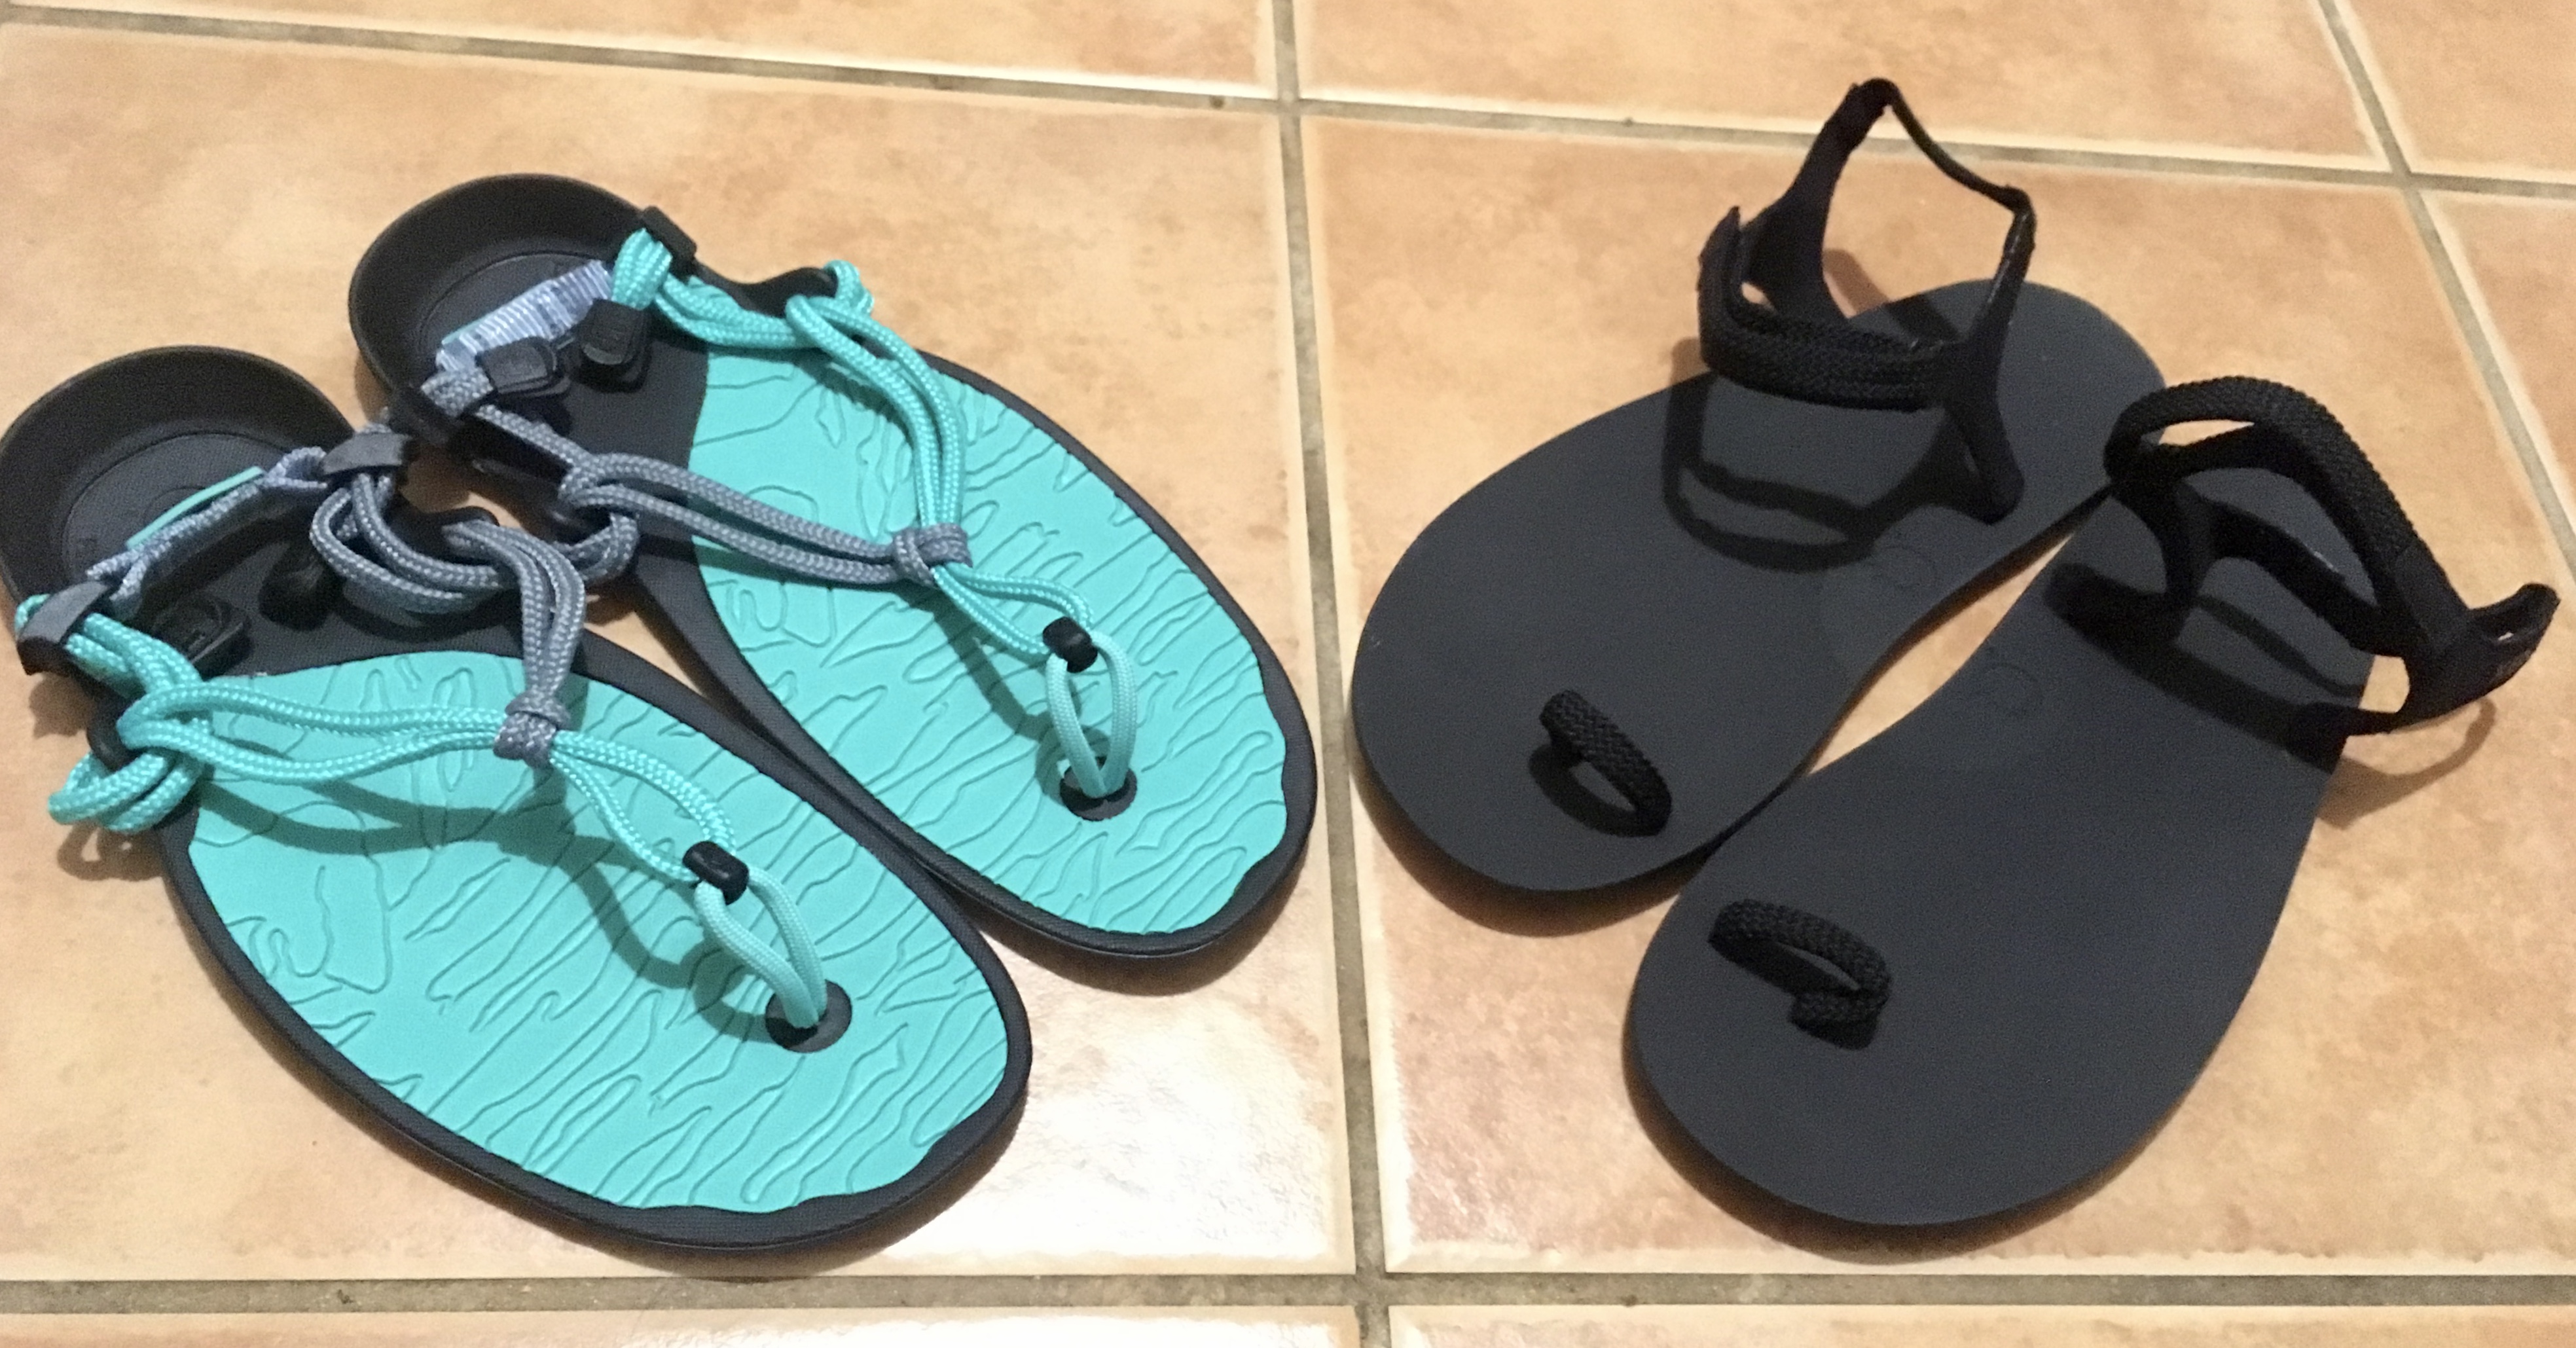 Xero Shoes Reviews Amuri Cloud And The Jessie Leap N2u Fitness